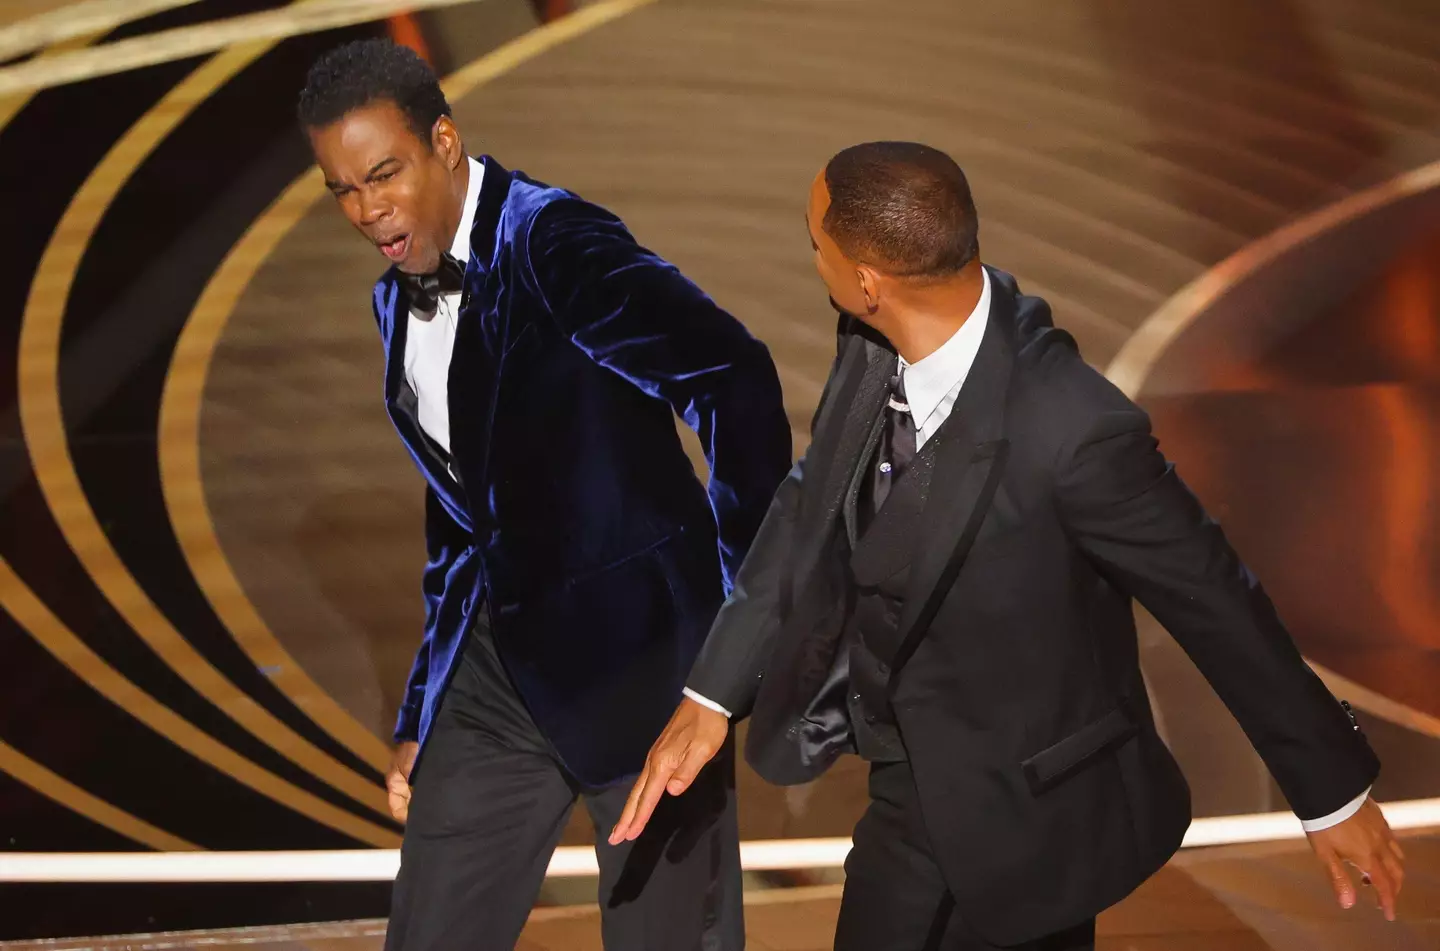 Smith slapped Rock at the Oscars earlier this year.